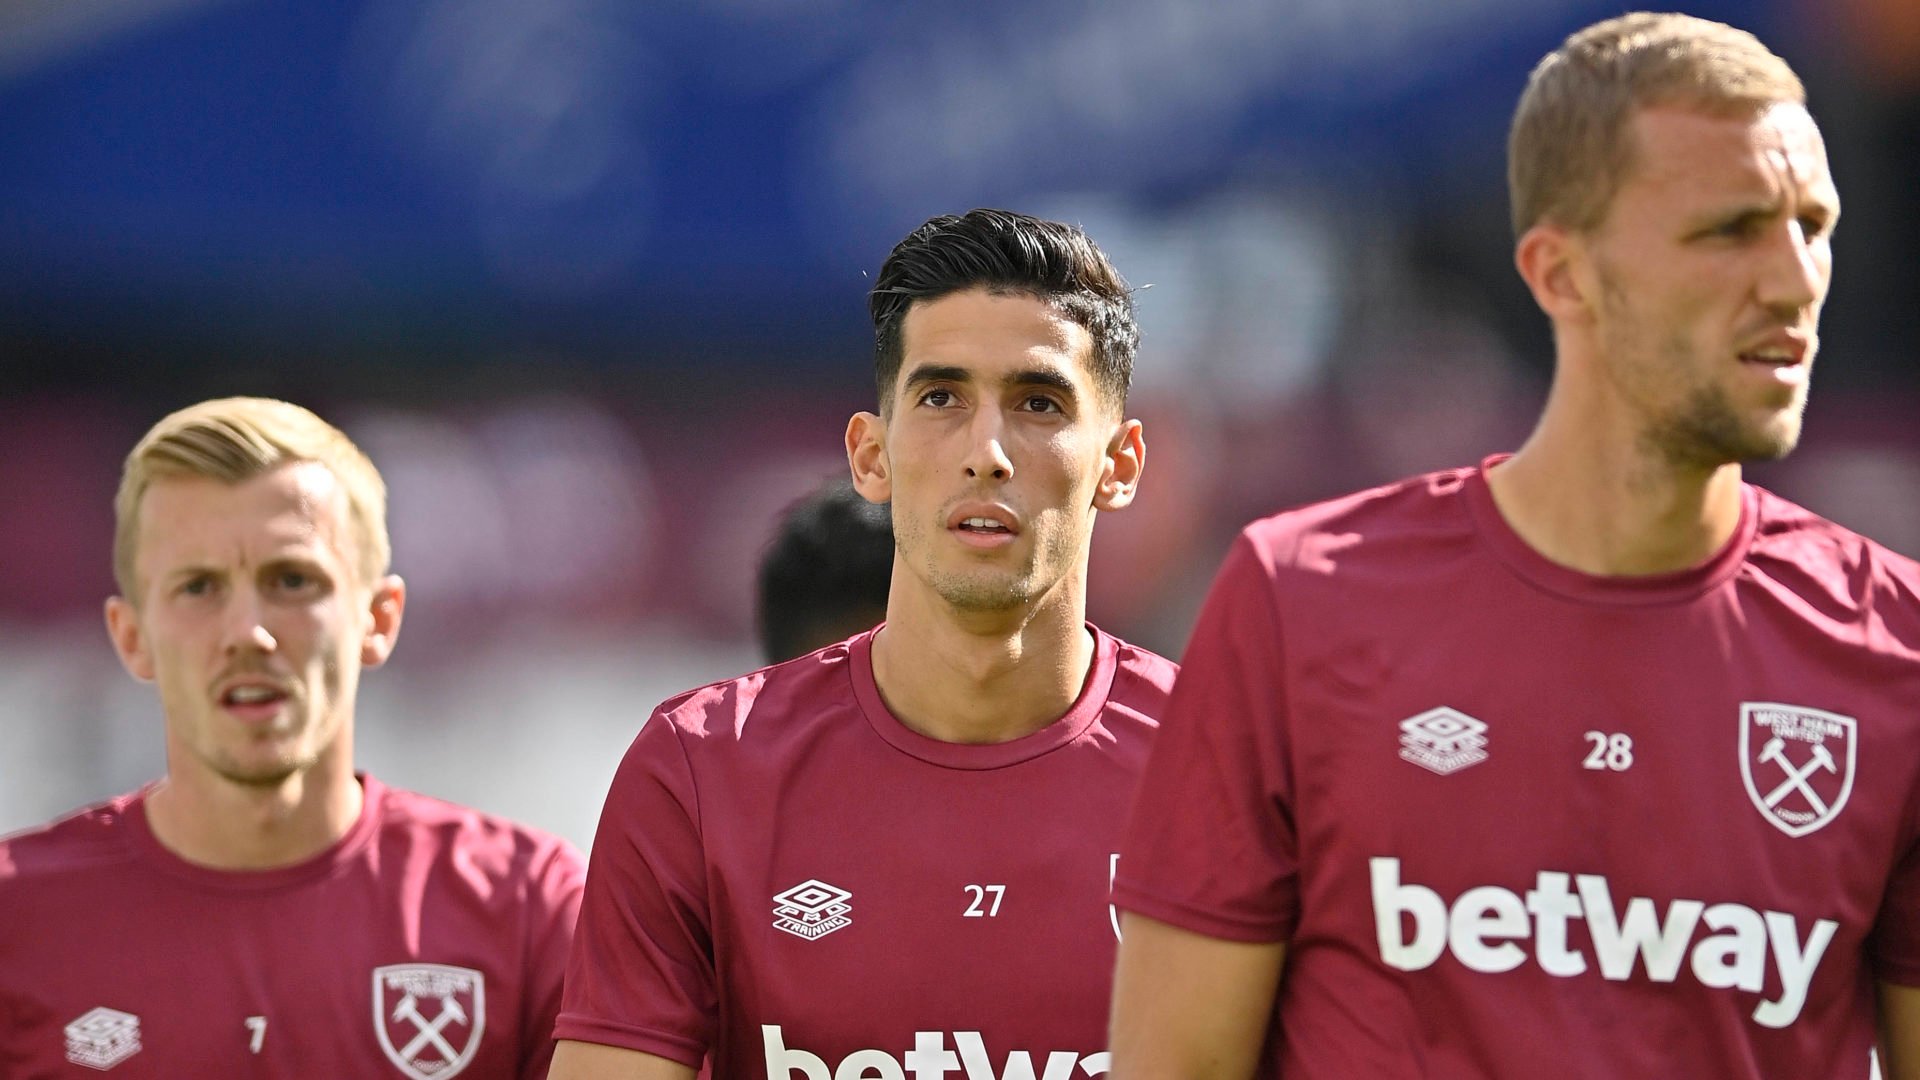 Major uncertainty for West Ham star Aguerd as tragedy hits Morocco